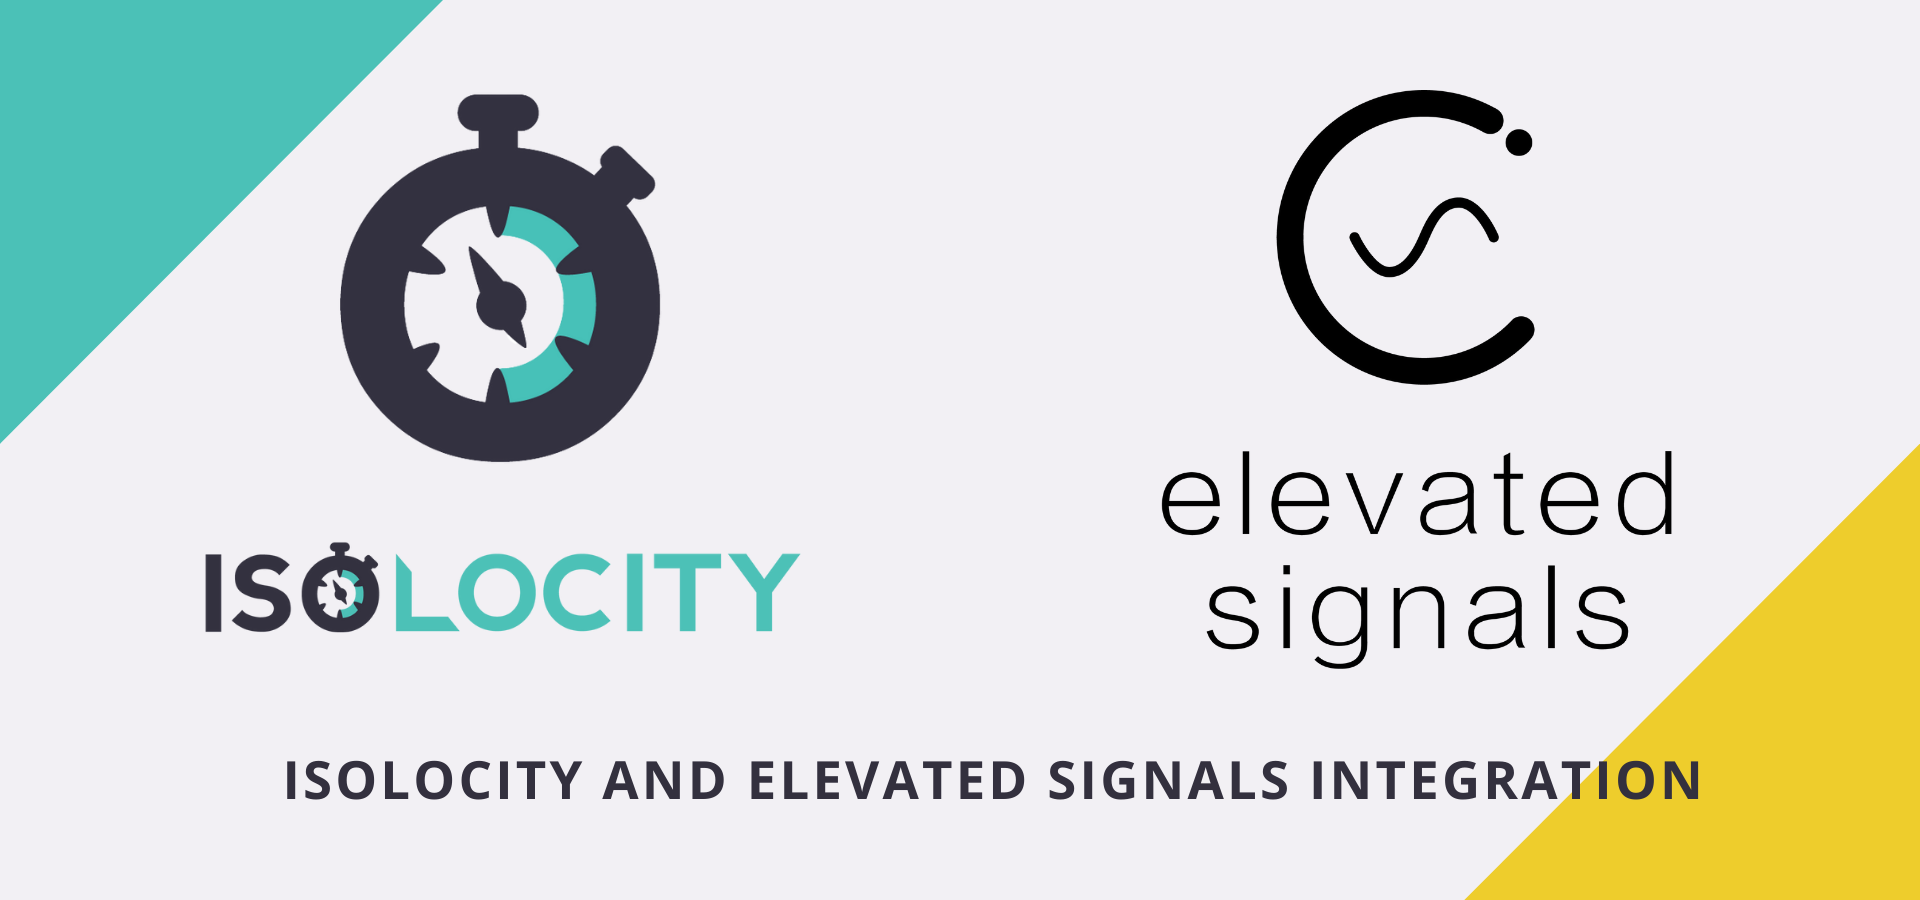 Isolocity and Elevated Signals Integration